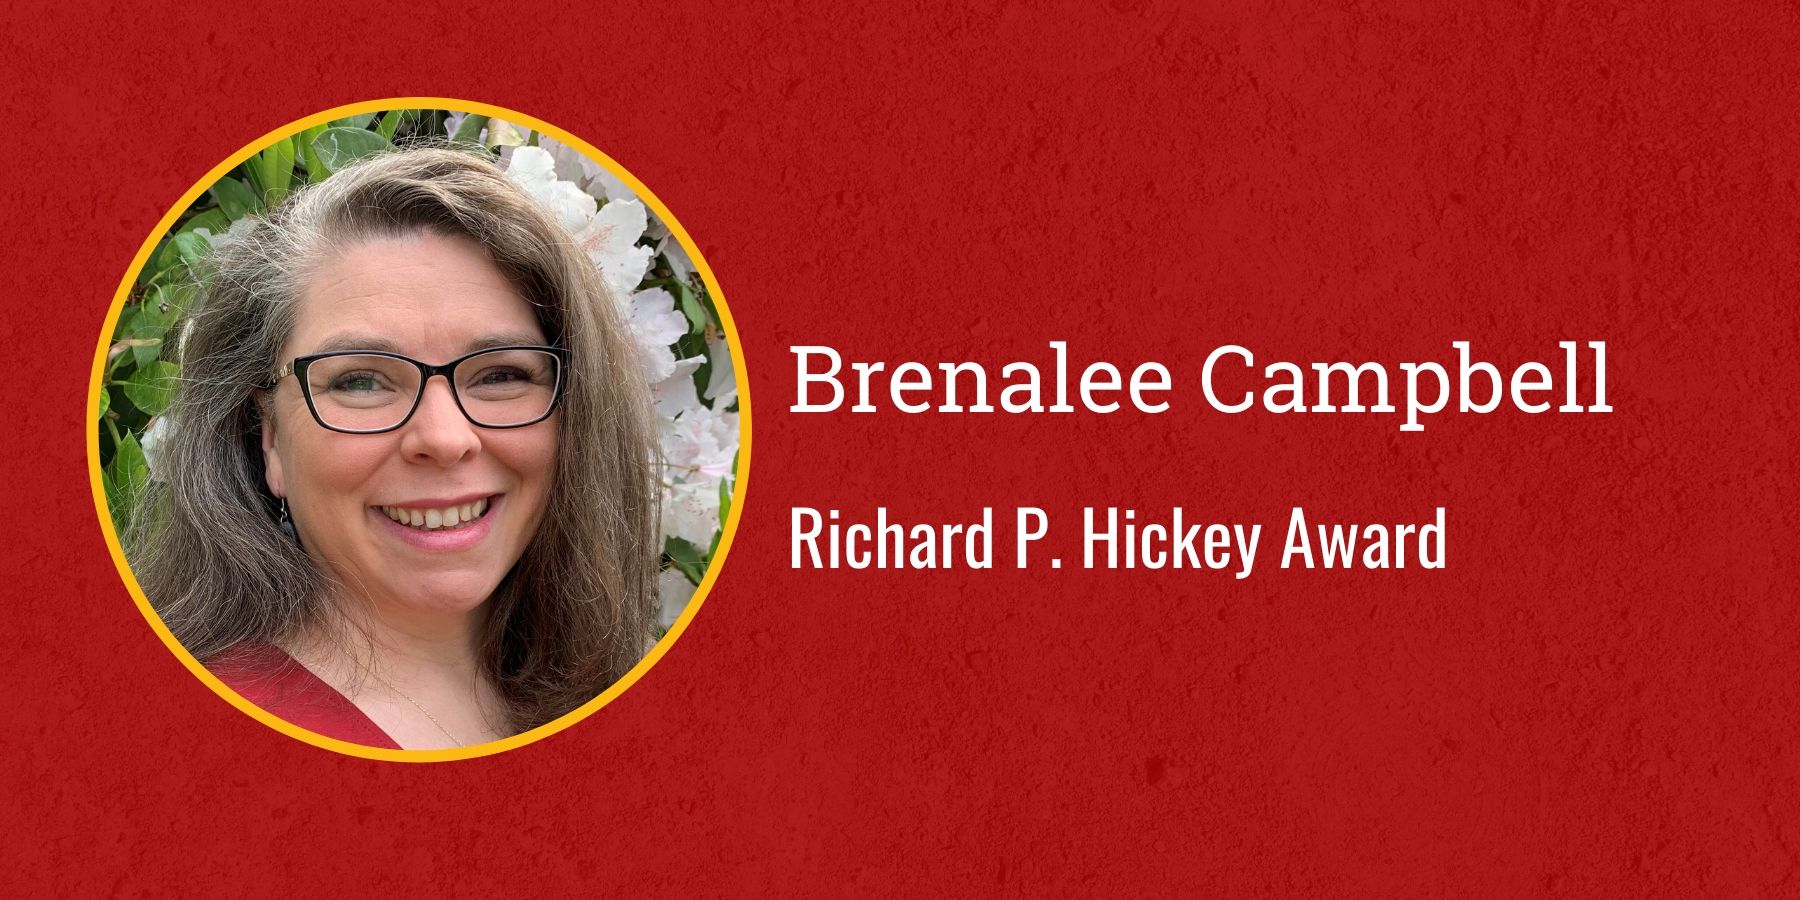 Photo of Brenalee Campbell and text Richard P. Hickey Award